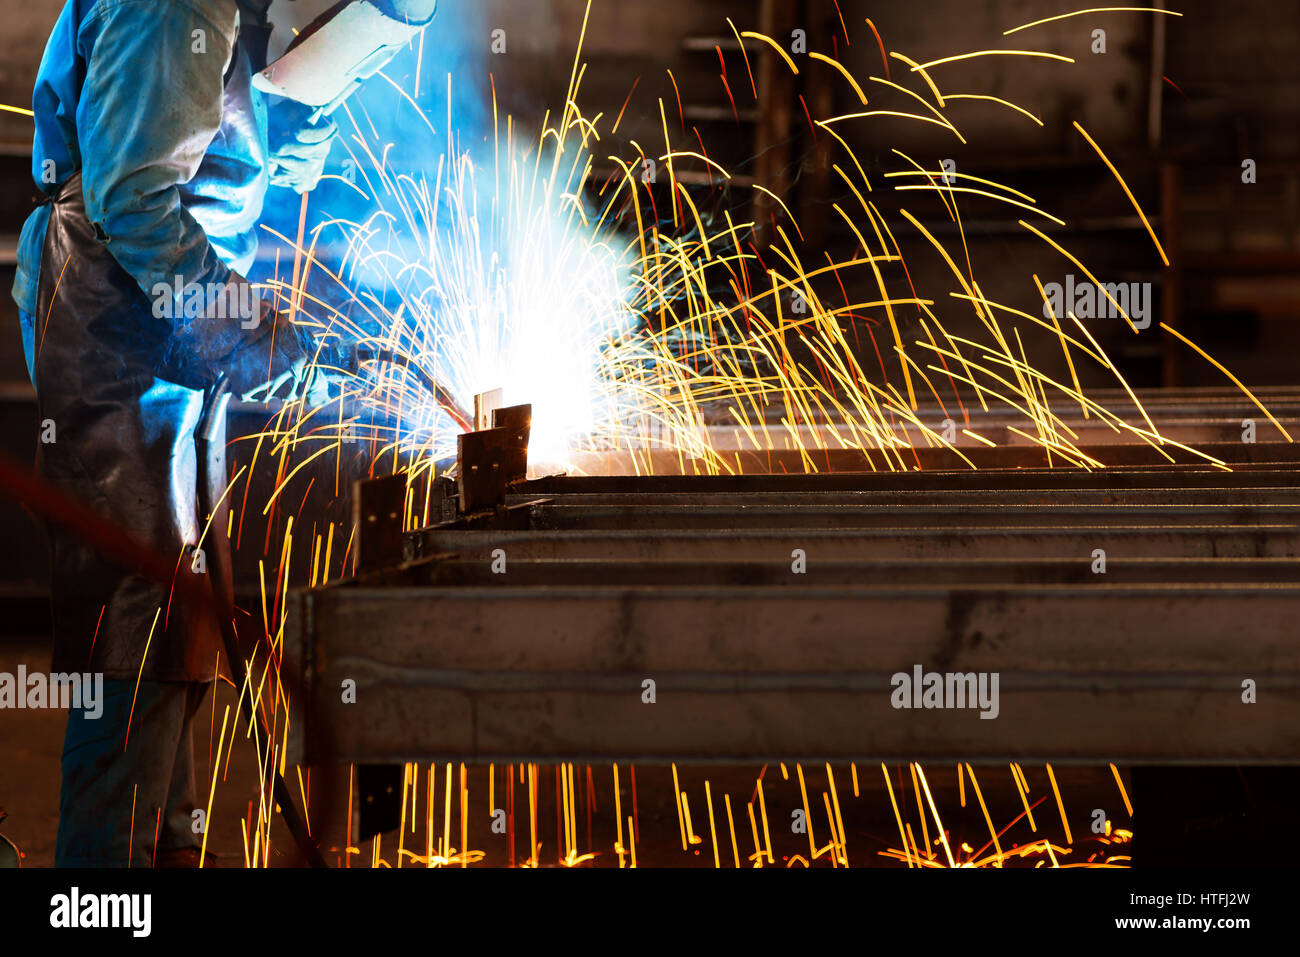 Workers at work, ongoing welding operation. Stock Photo